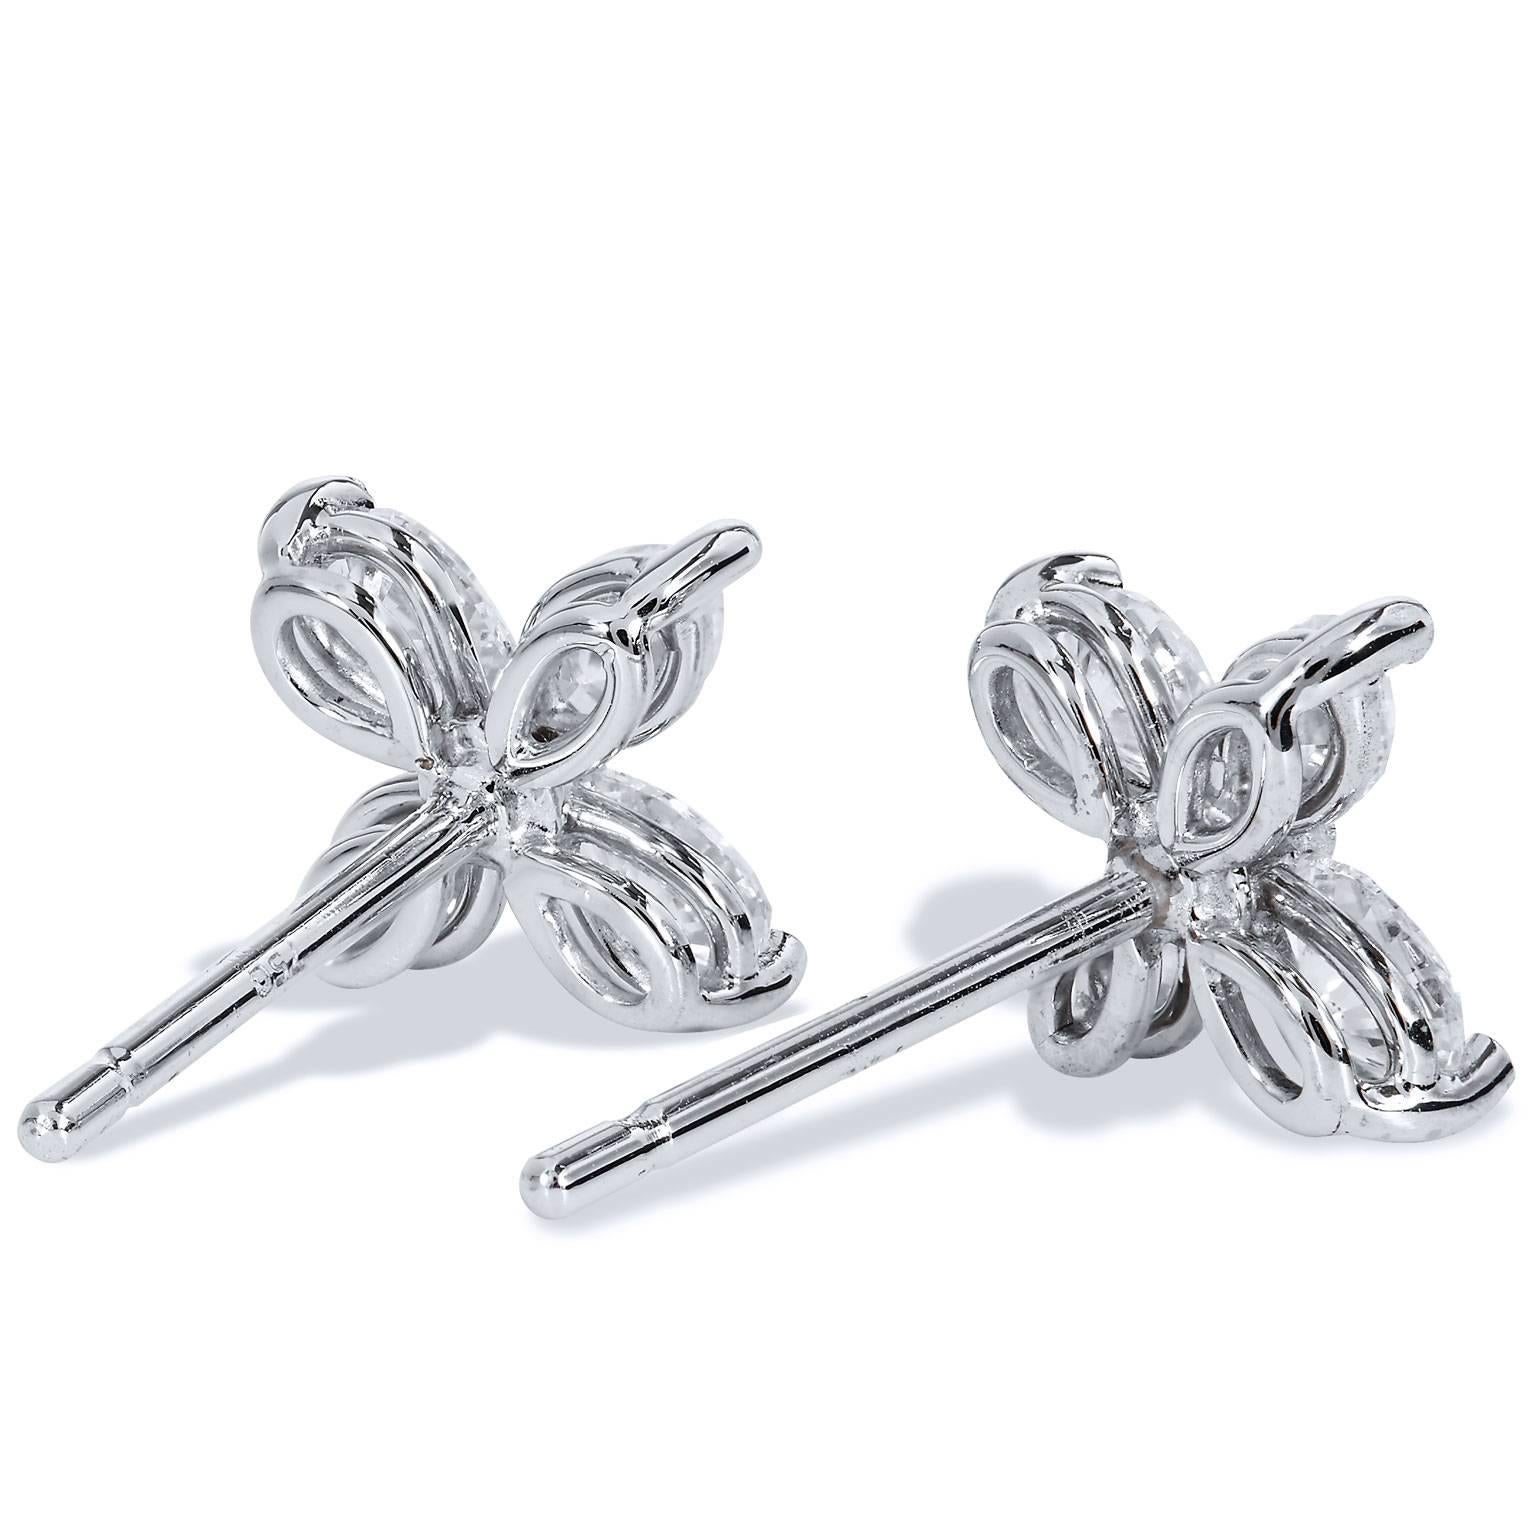 Eight pieces of marquise cut diamonds (total weight = 0.70 carat; F/G/VS2/SI1) with their lovely curving and fantastically oblong shape merge to form two flower-shaped 18 karat white gold and diamond stud earrings. Handcrafted by H and H, these